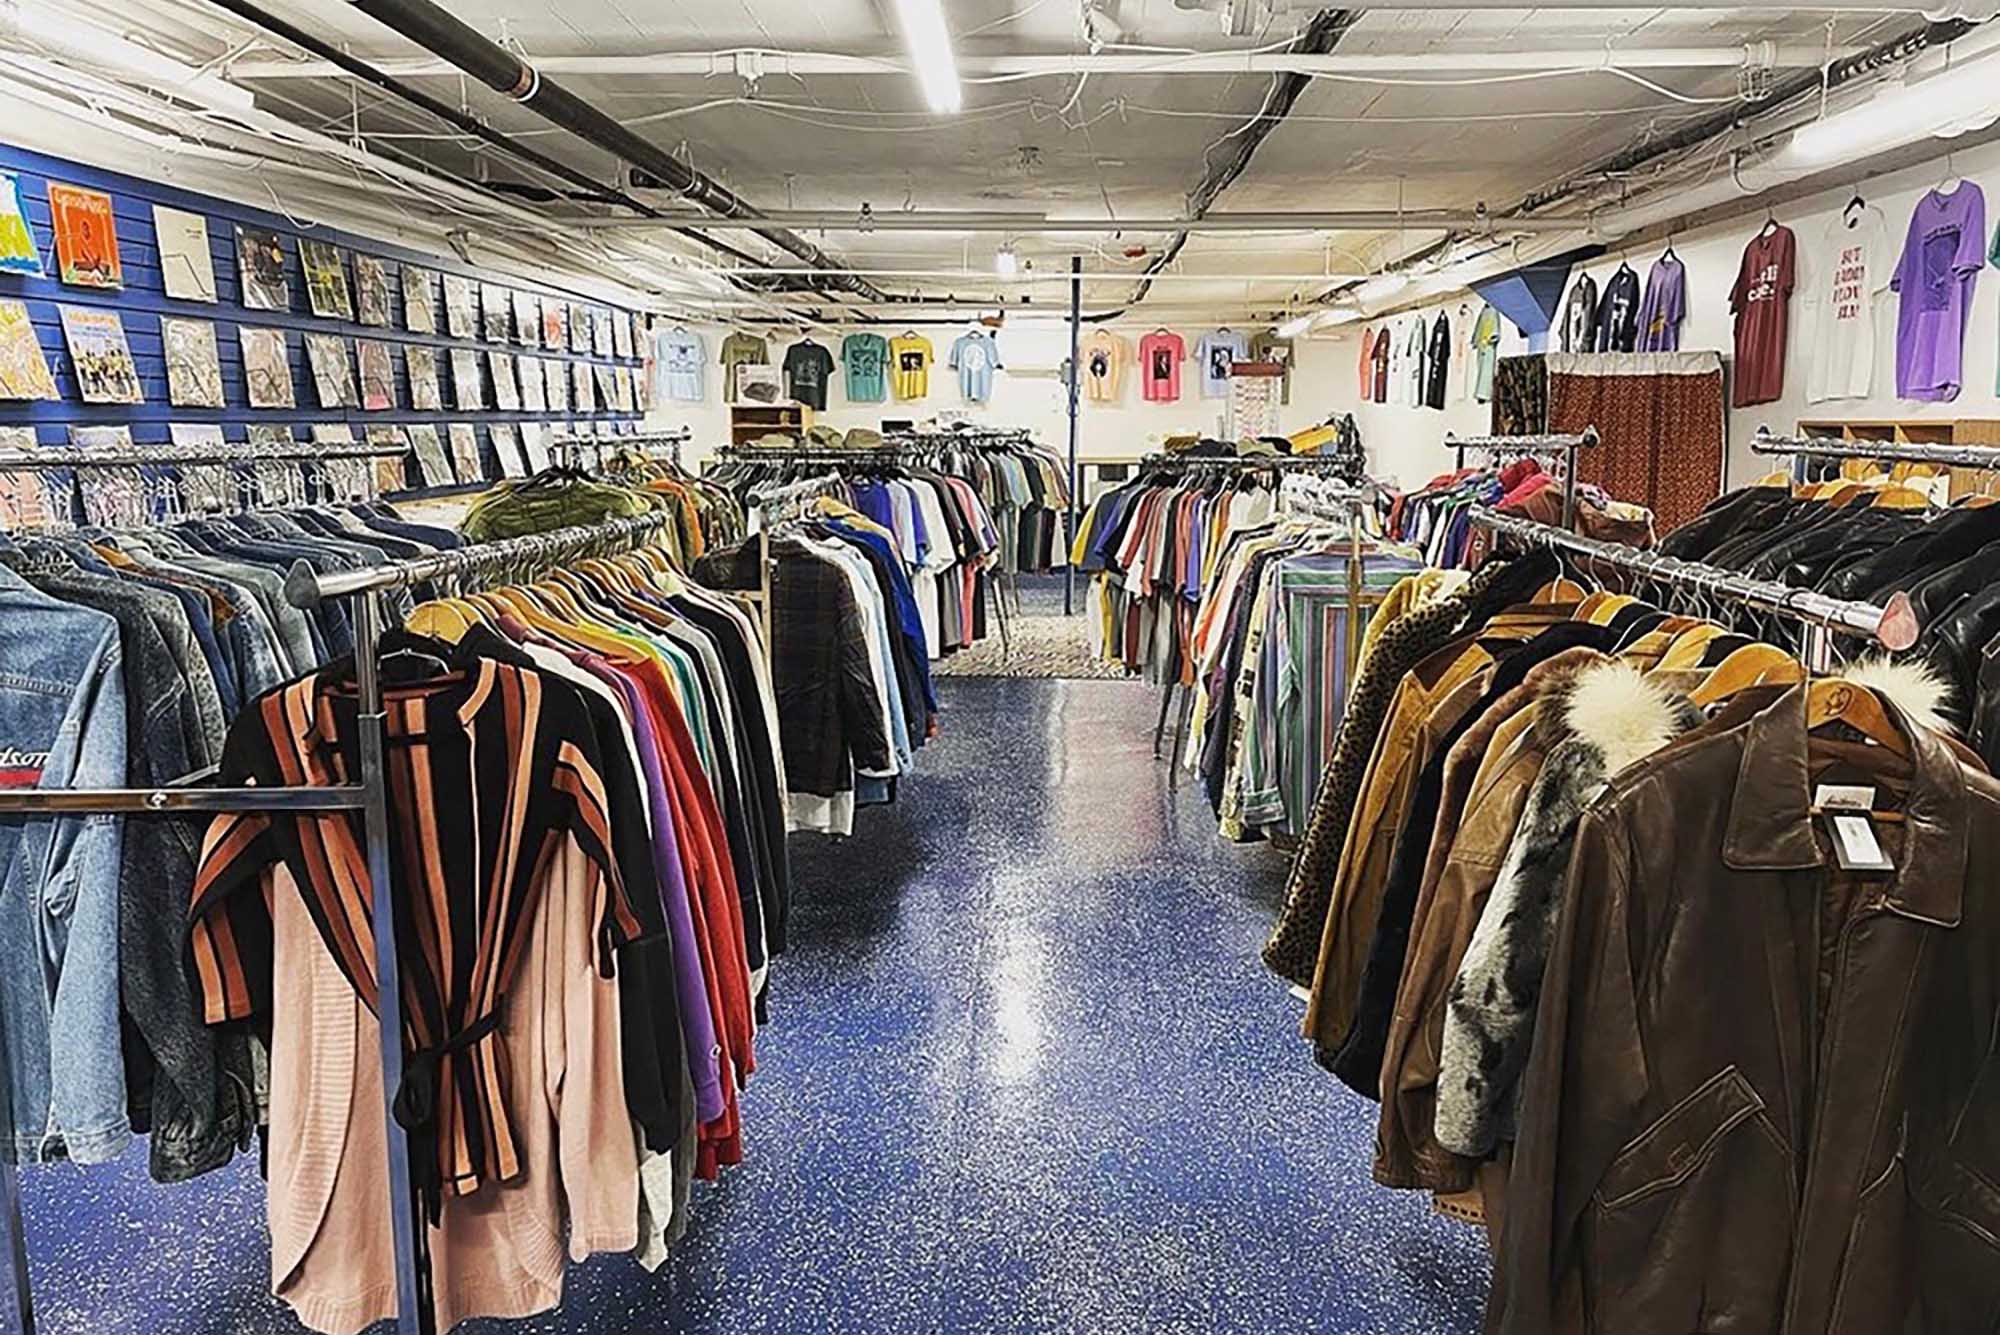 9 Thrift Stores For Buying Vintage Clothing Online - The Good Trade